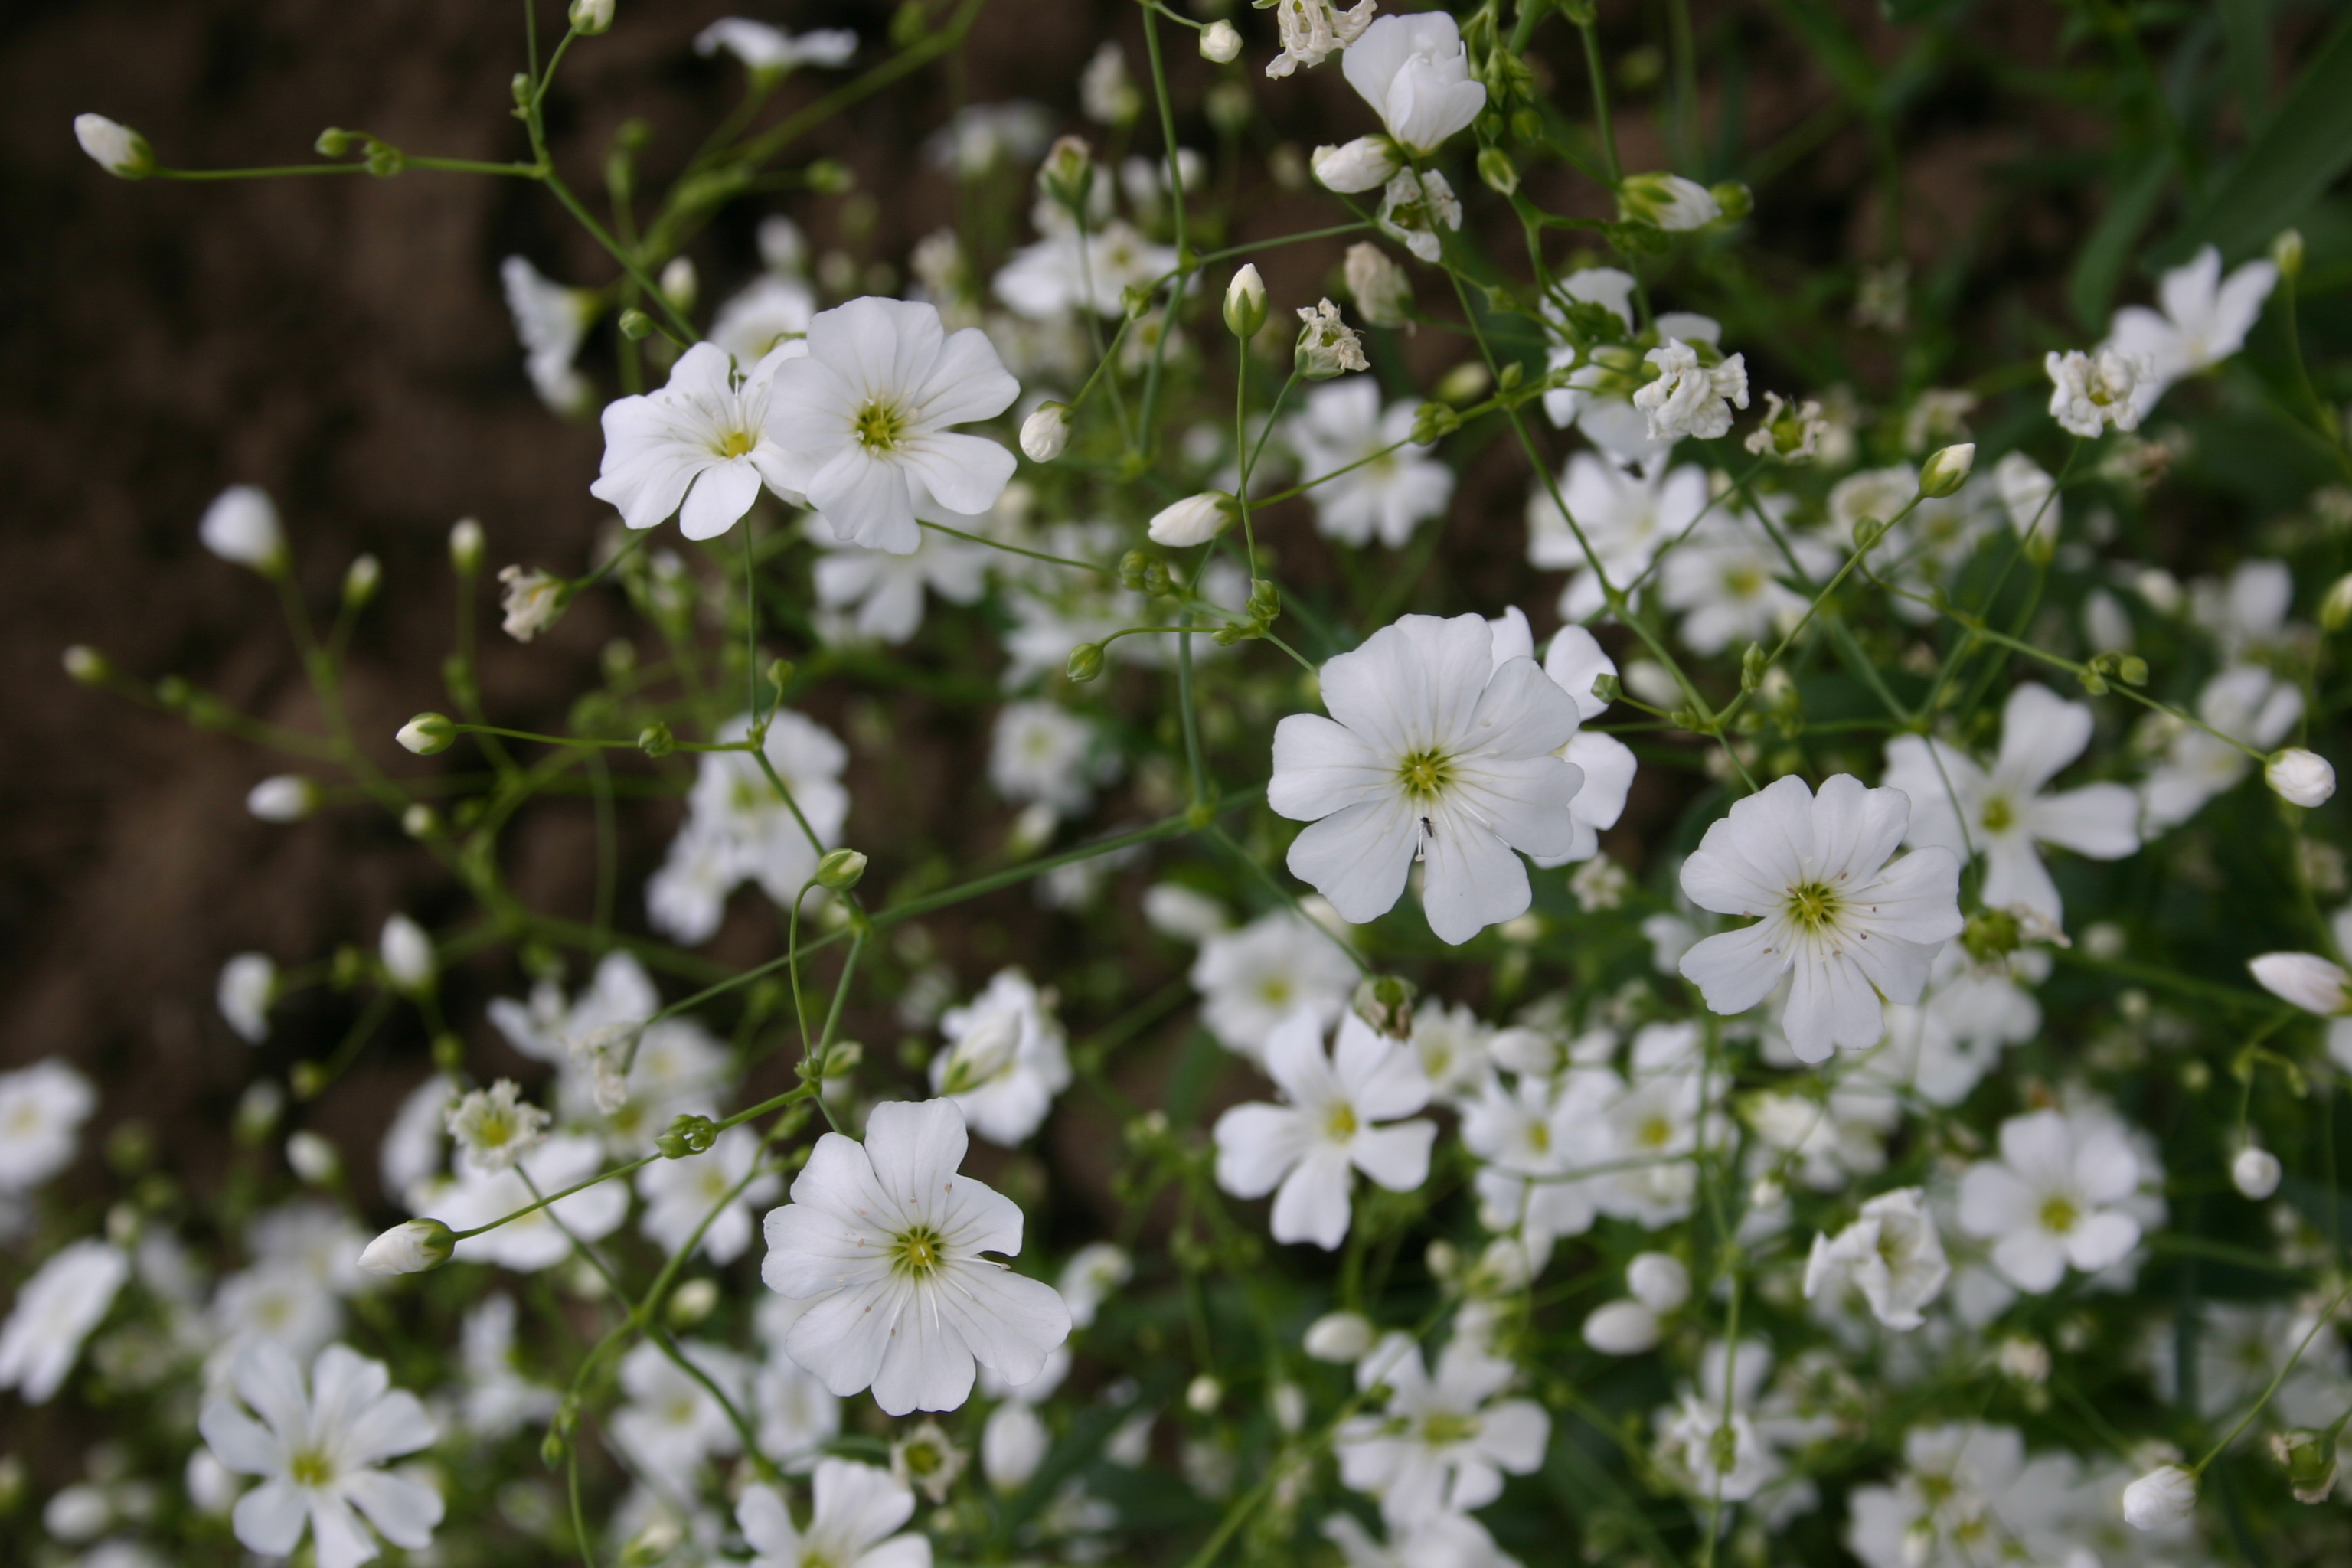 Baby's Breath - Covent Garden White - Oregon Wholesale Seed Company